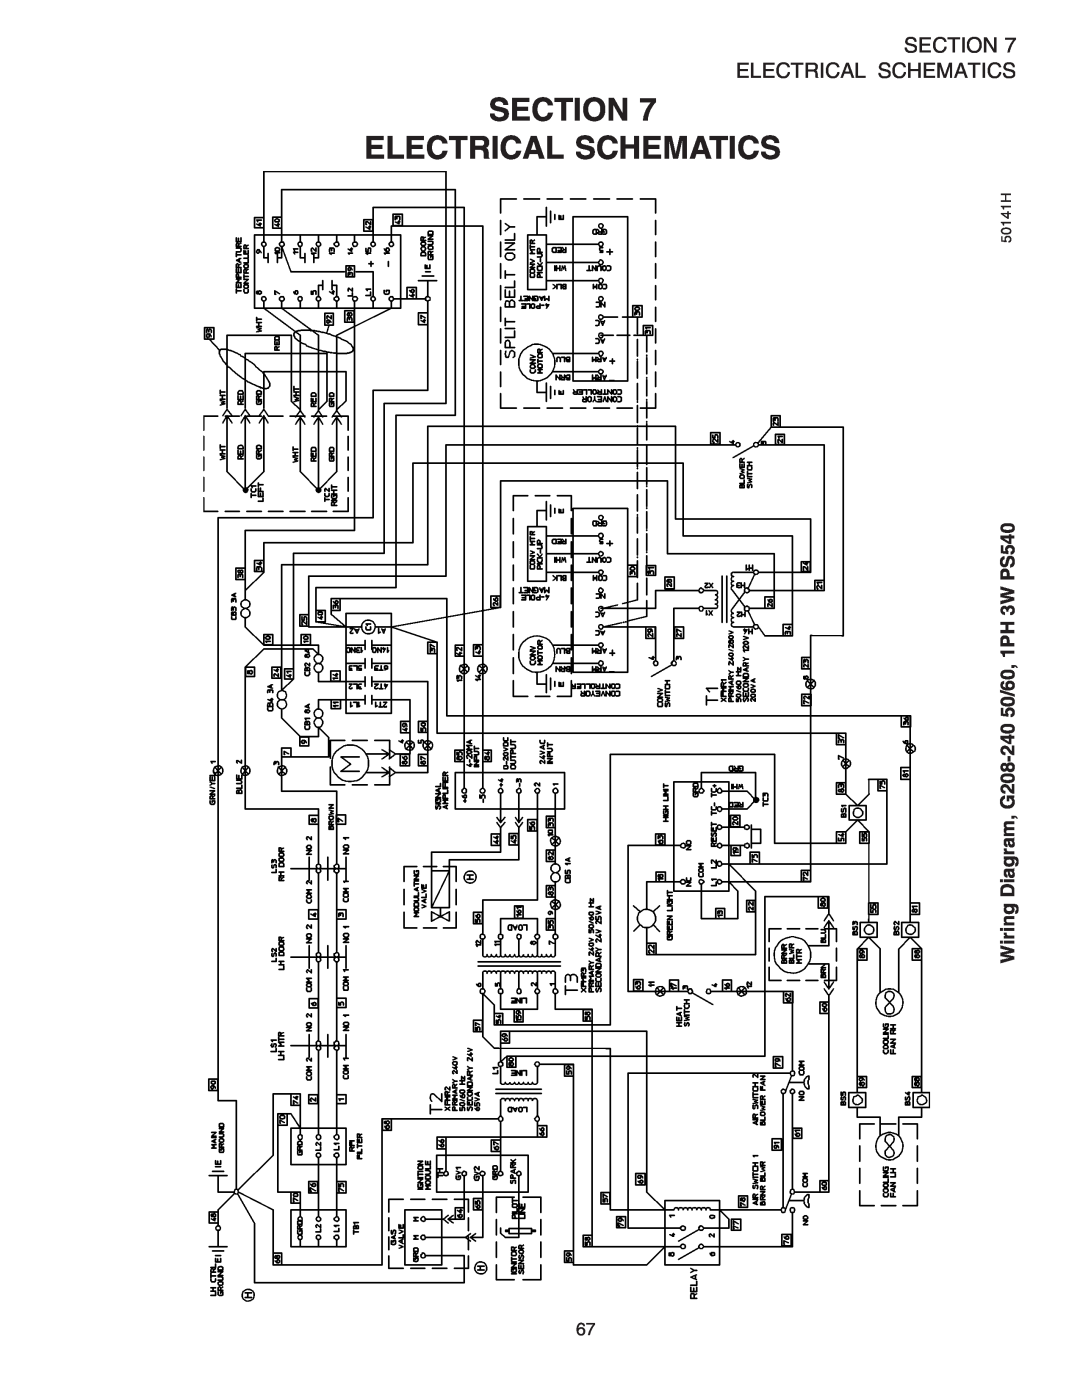 Middleby Marshall PS540G installation manual Section Electrical Schematics, Wiring Diagram, G208-240 50/60, 1PH 3W PS540 